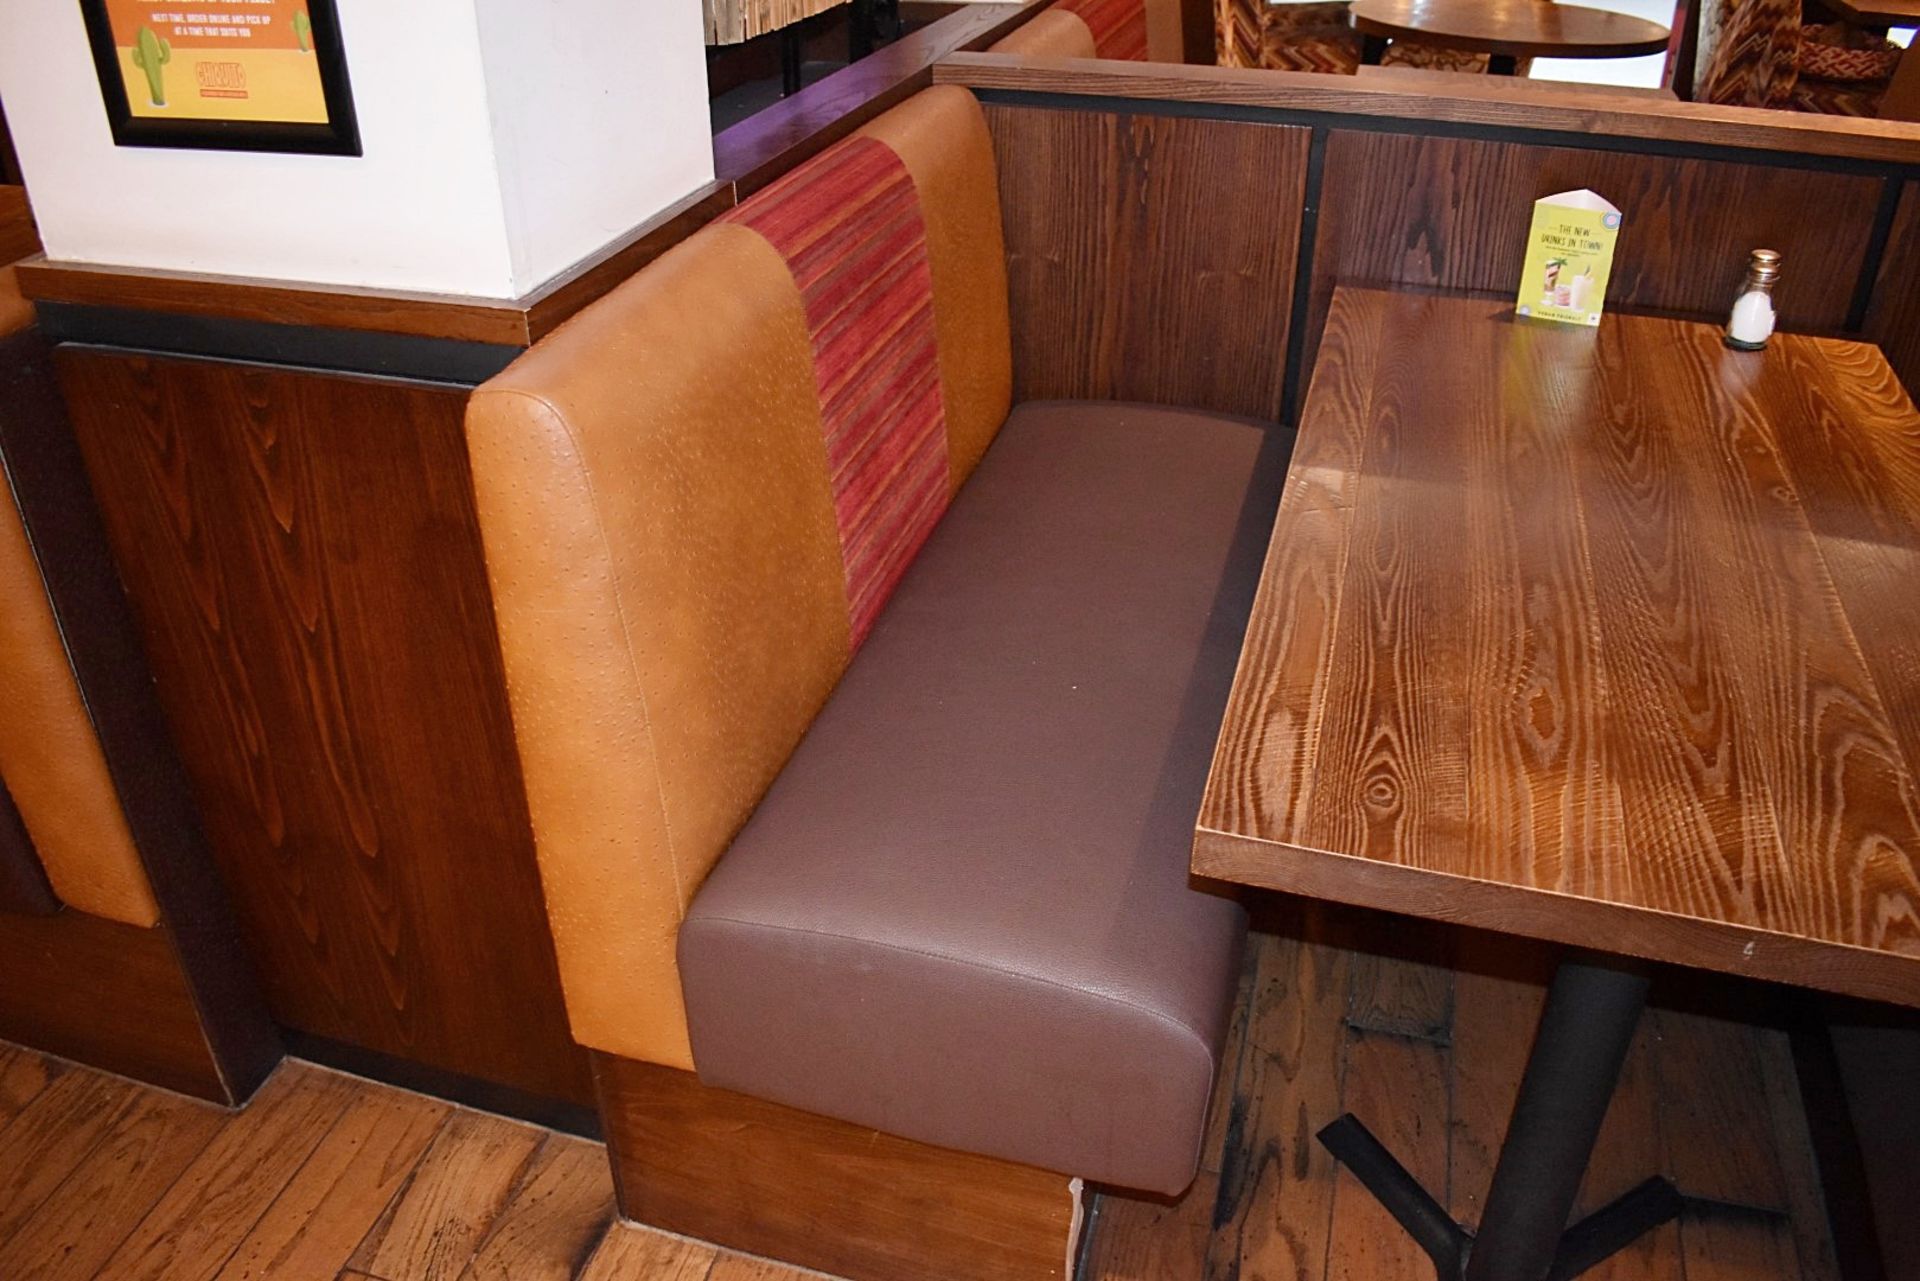 15-Pieces Of Restaurant Booth Seating Of Varying Length - Image 12 of 22